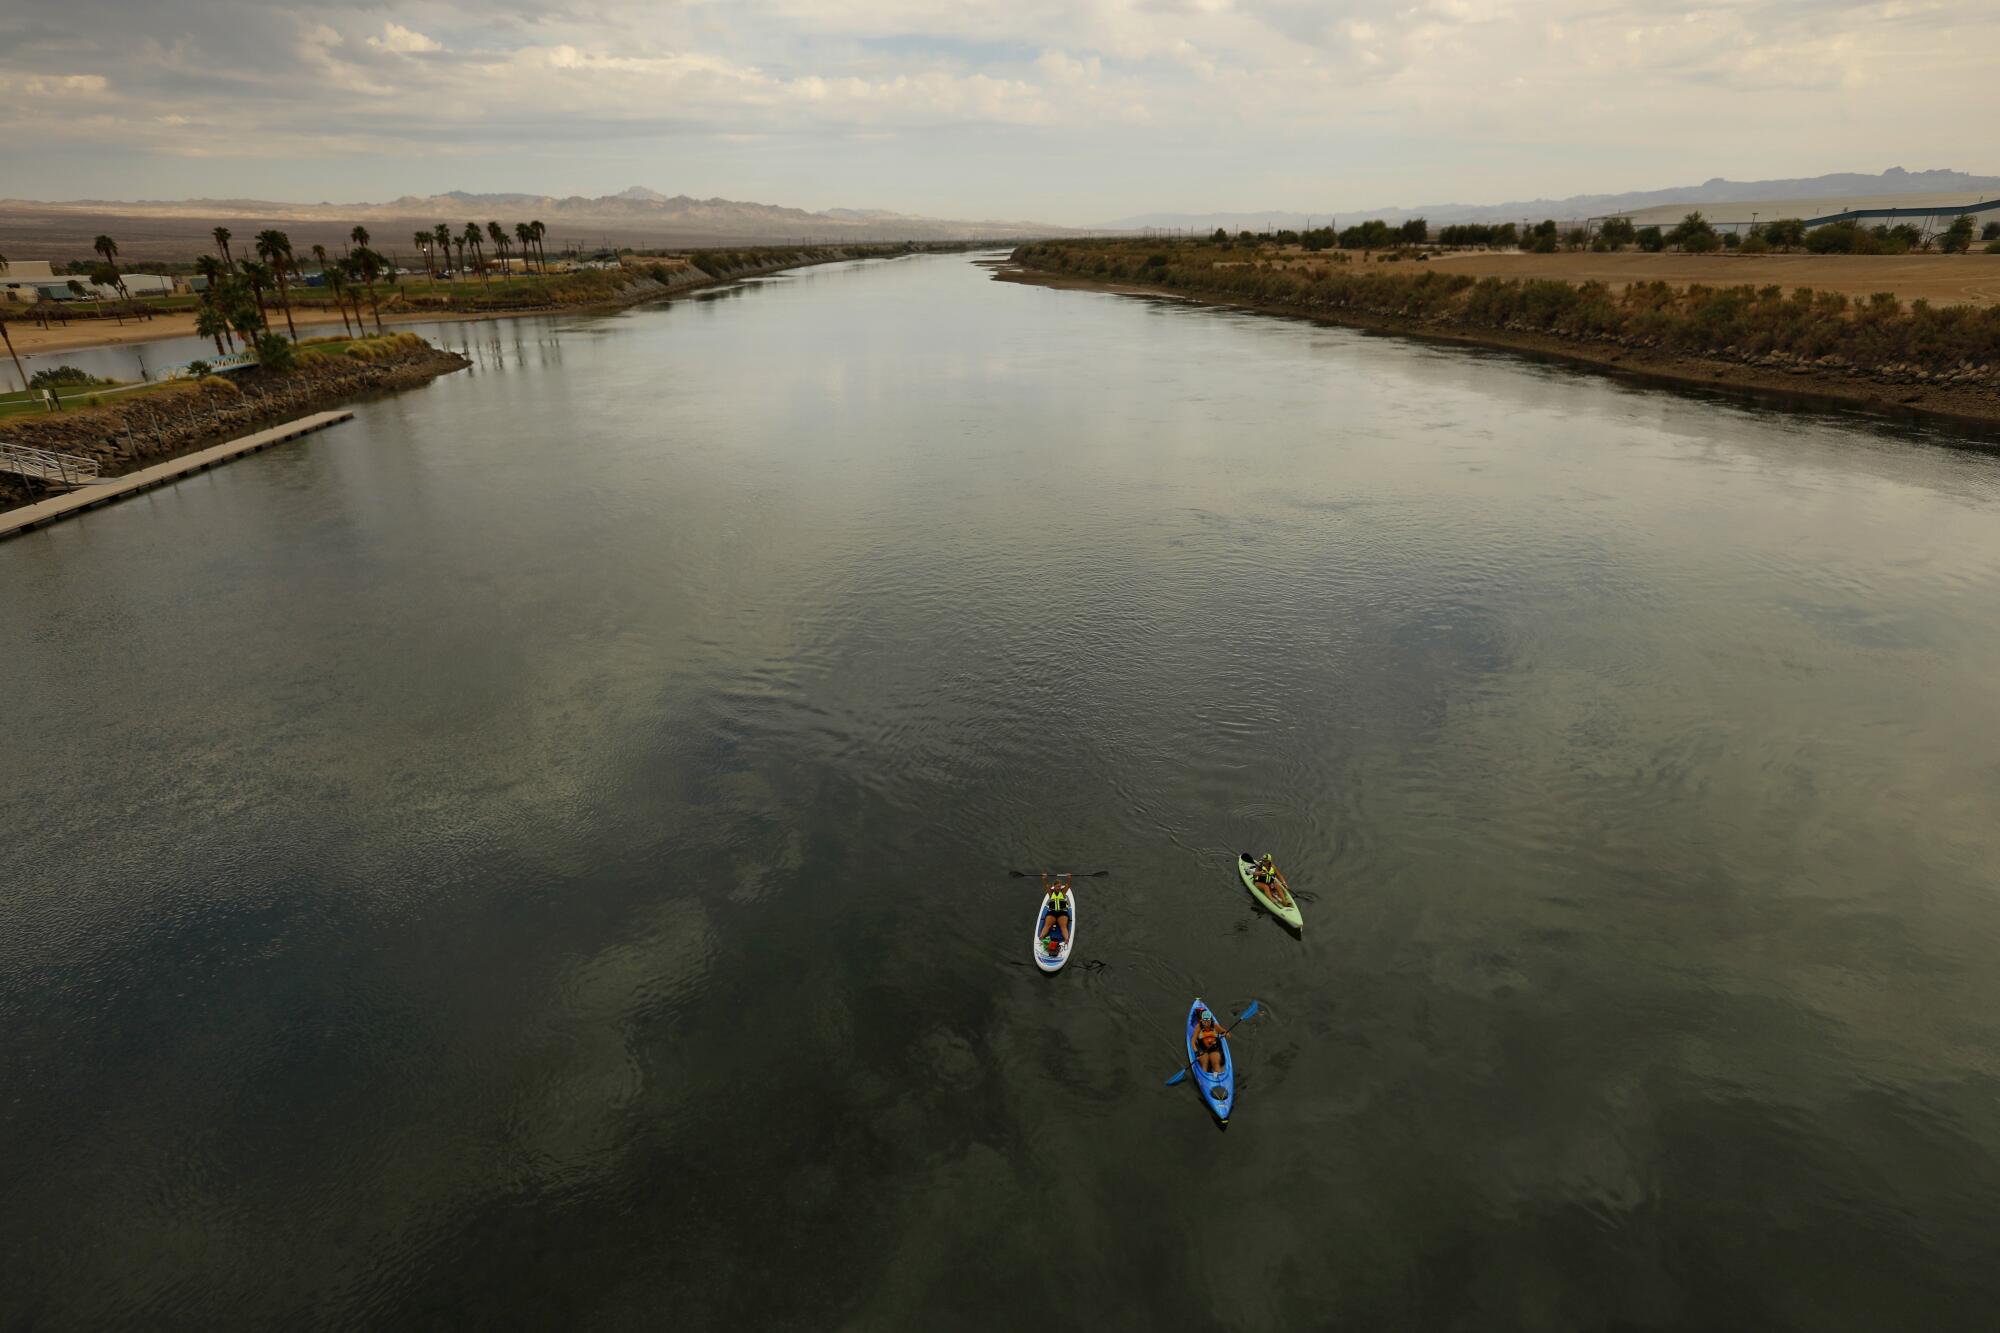 Kayakers float down the Colorado River through the Fort Mojave Reservation.